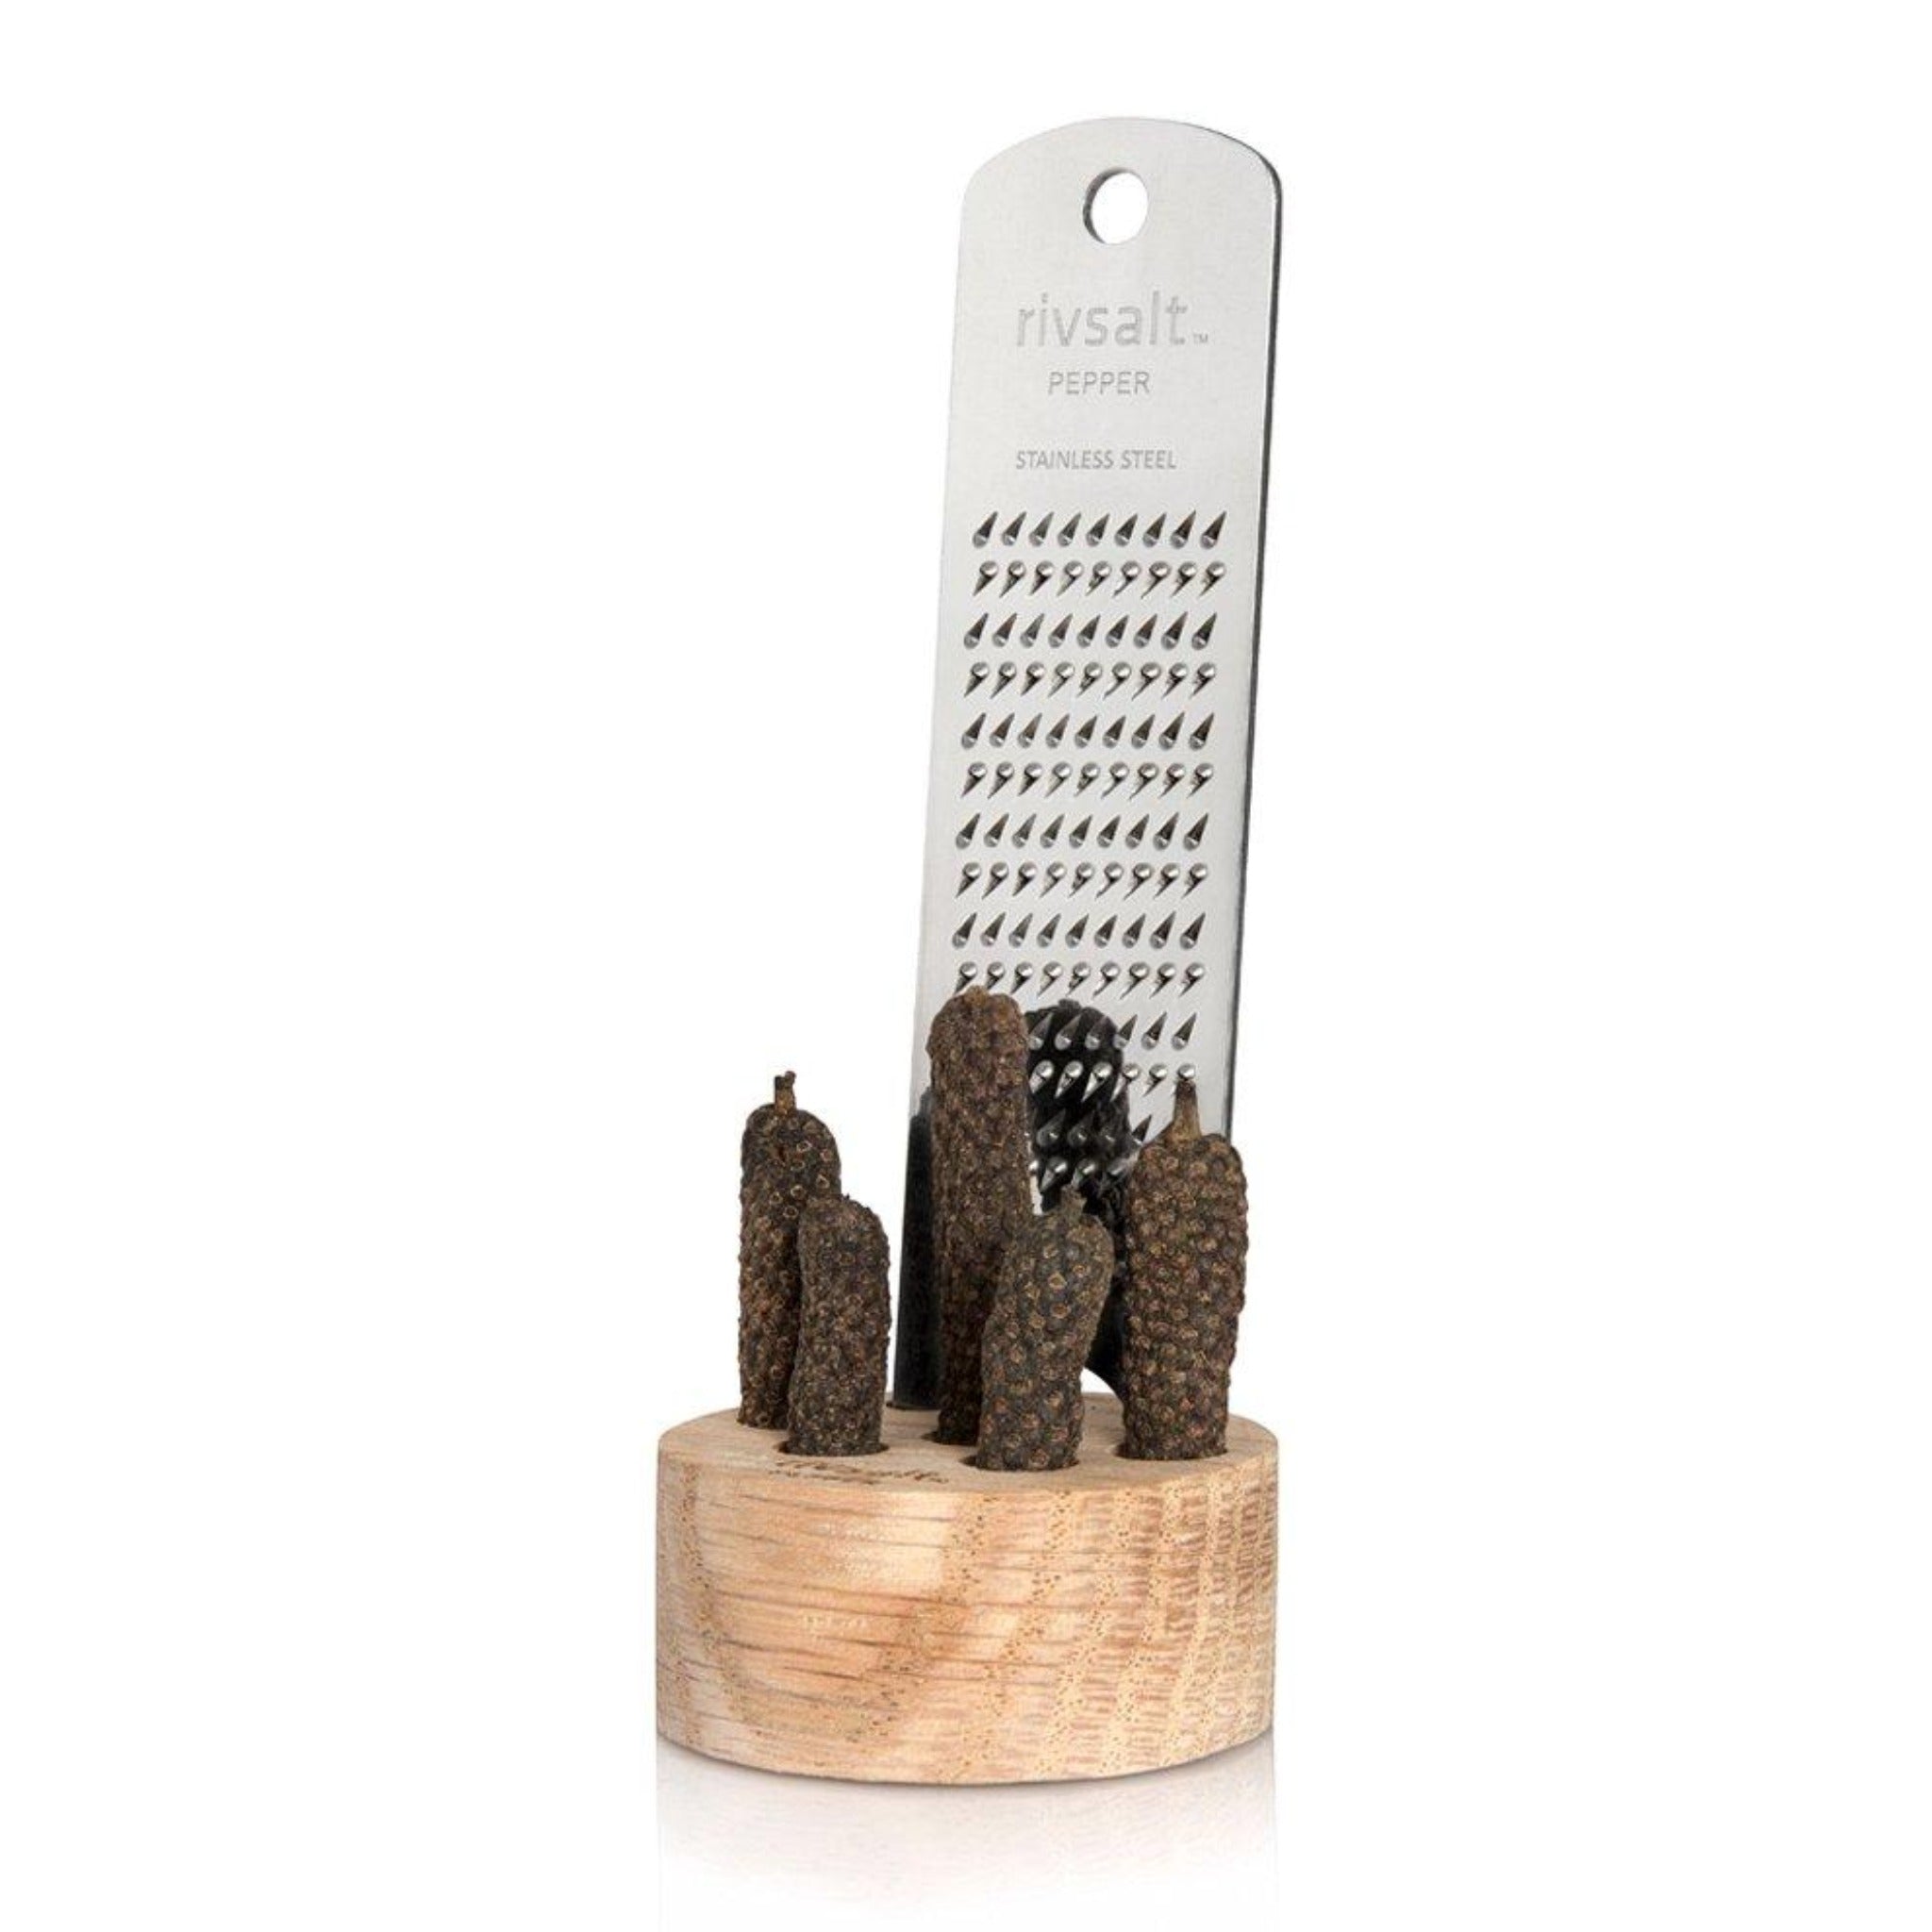 011 PEPPER - stainless steel grater. stand in natural oak. java long peppers. stylish gift pack.